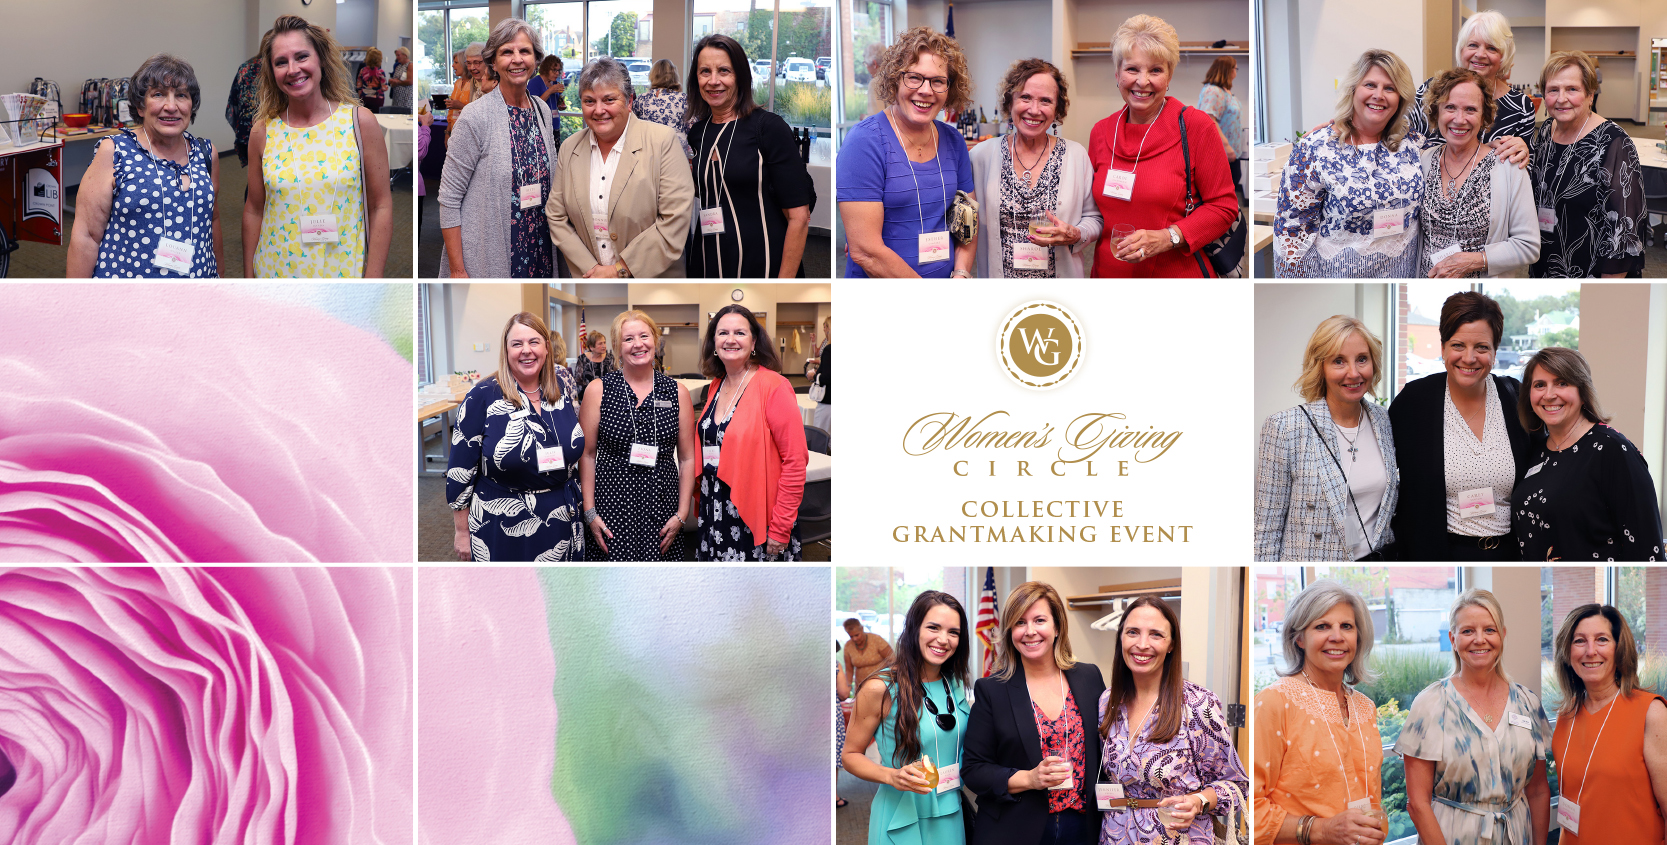 Women's Giving Circle Collective Grantmaking Event